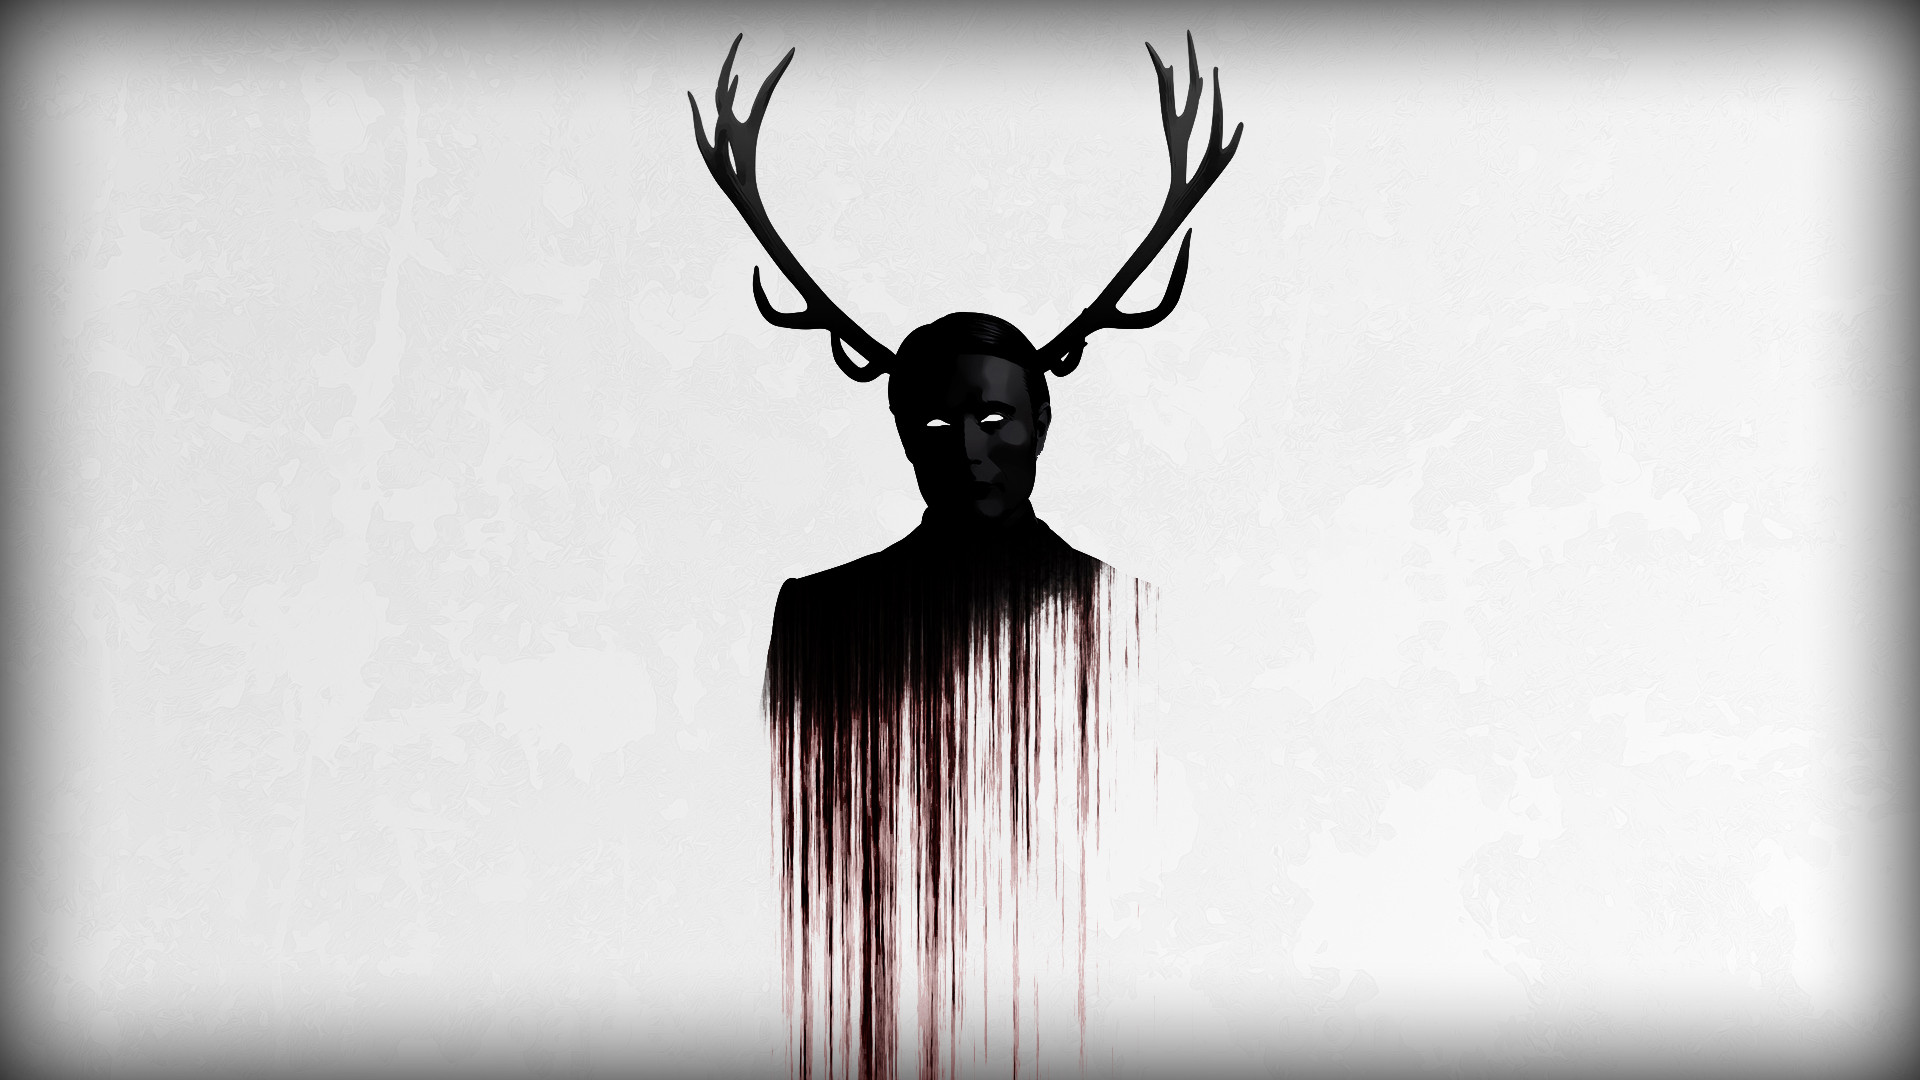 160+ Hannibal HD Wallpapers and Backgrounds